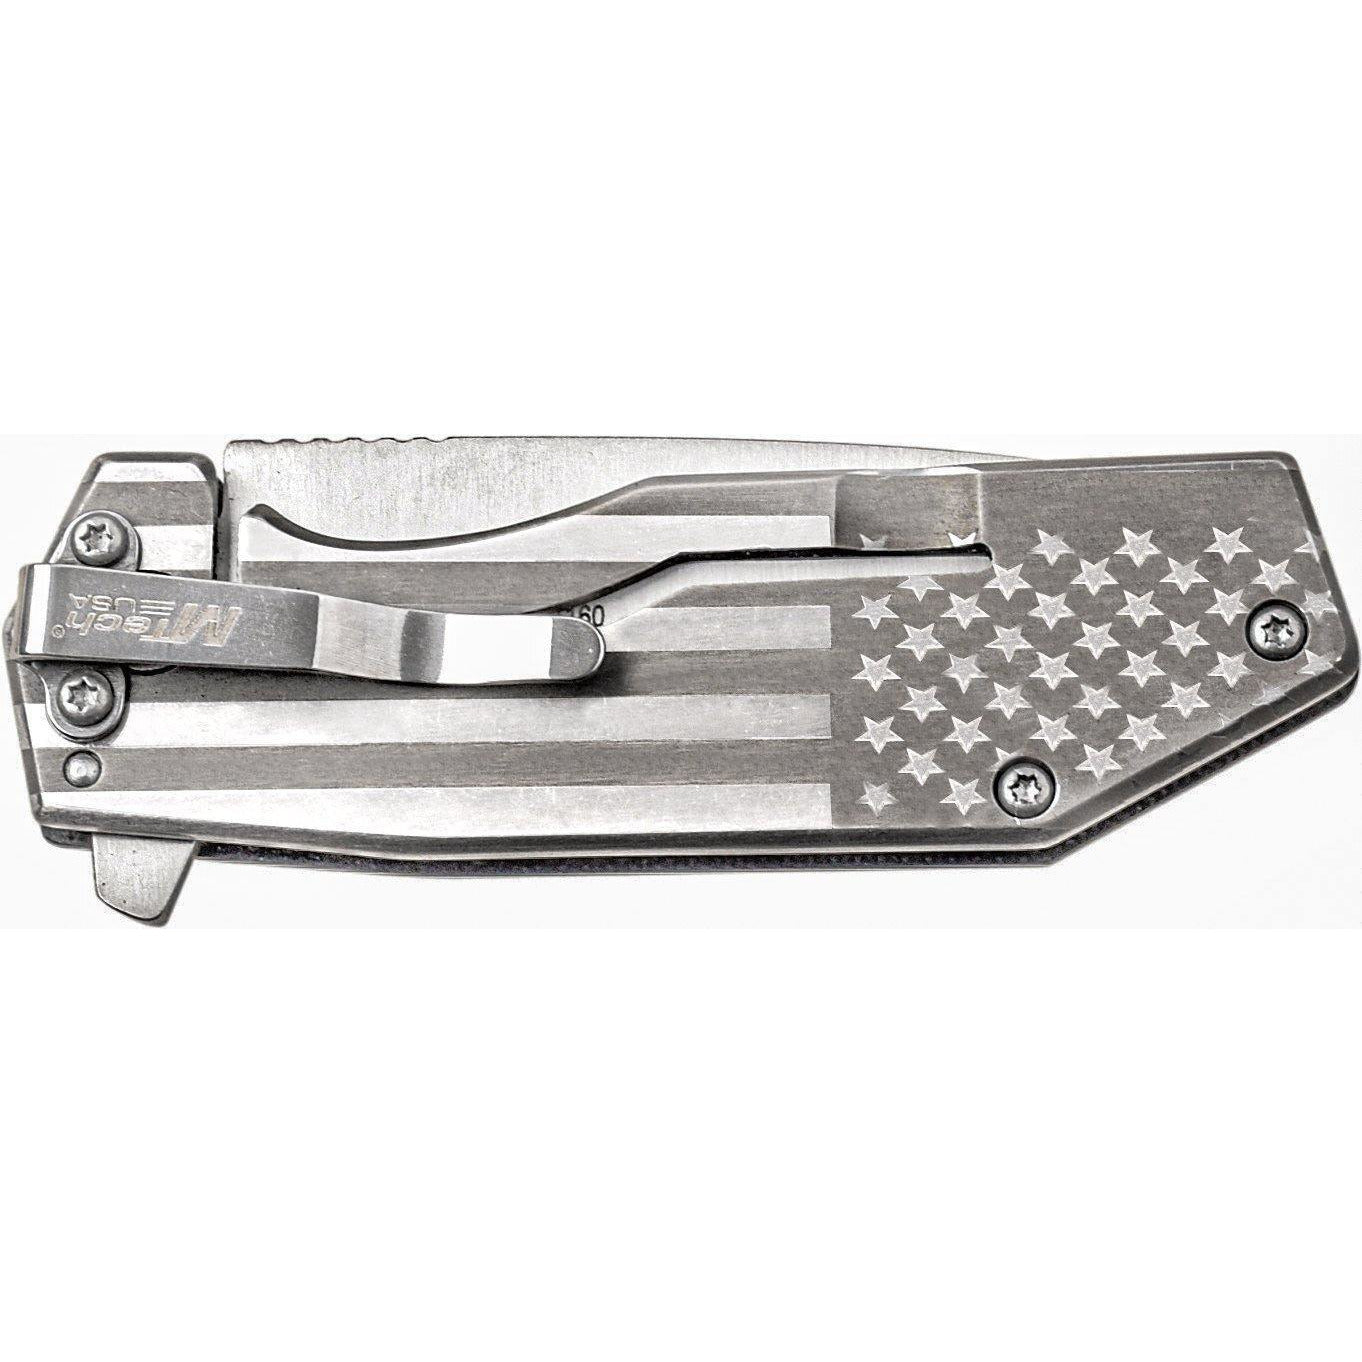 Mtech Drop Point Fine Edge Blade Folding Knife - 6 Inches Overall G10 Handle #mt-1160Sf - Xhunter New Zealand